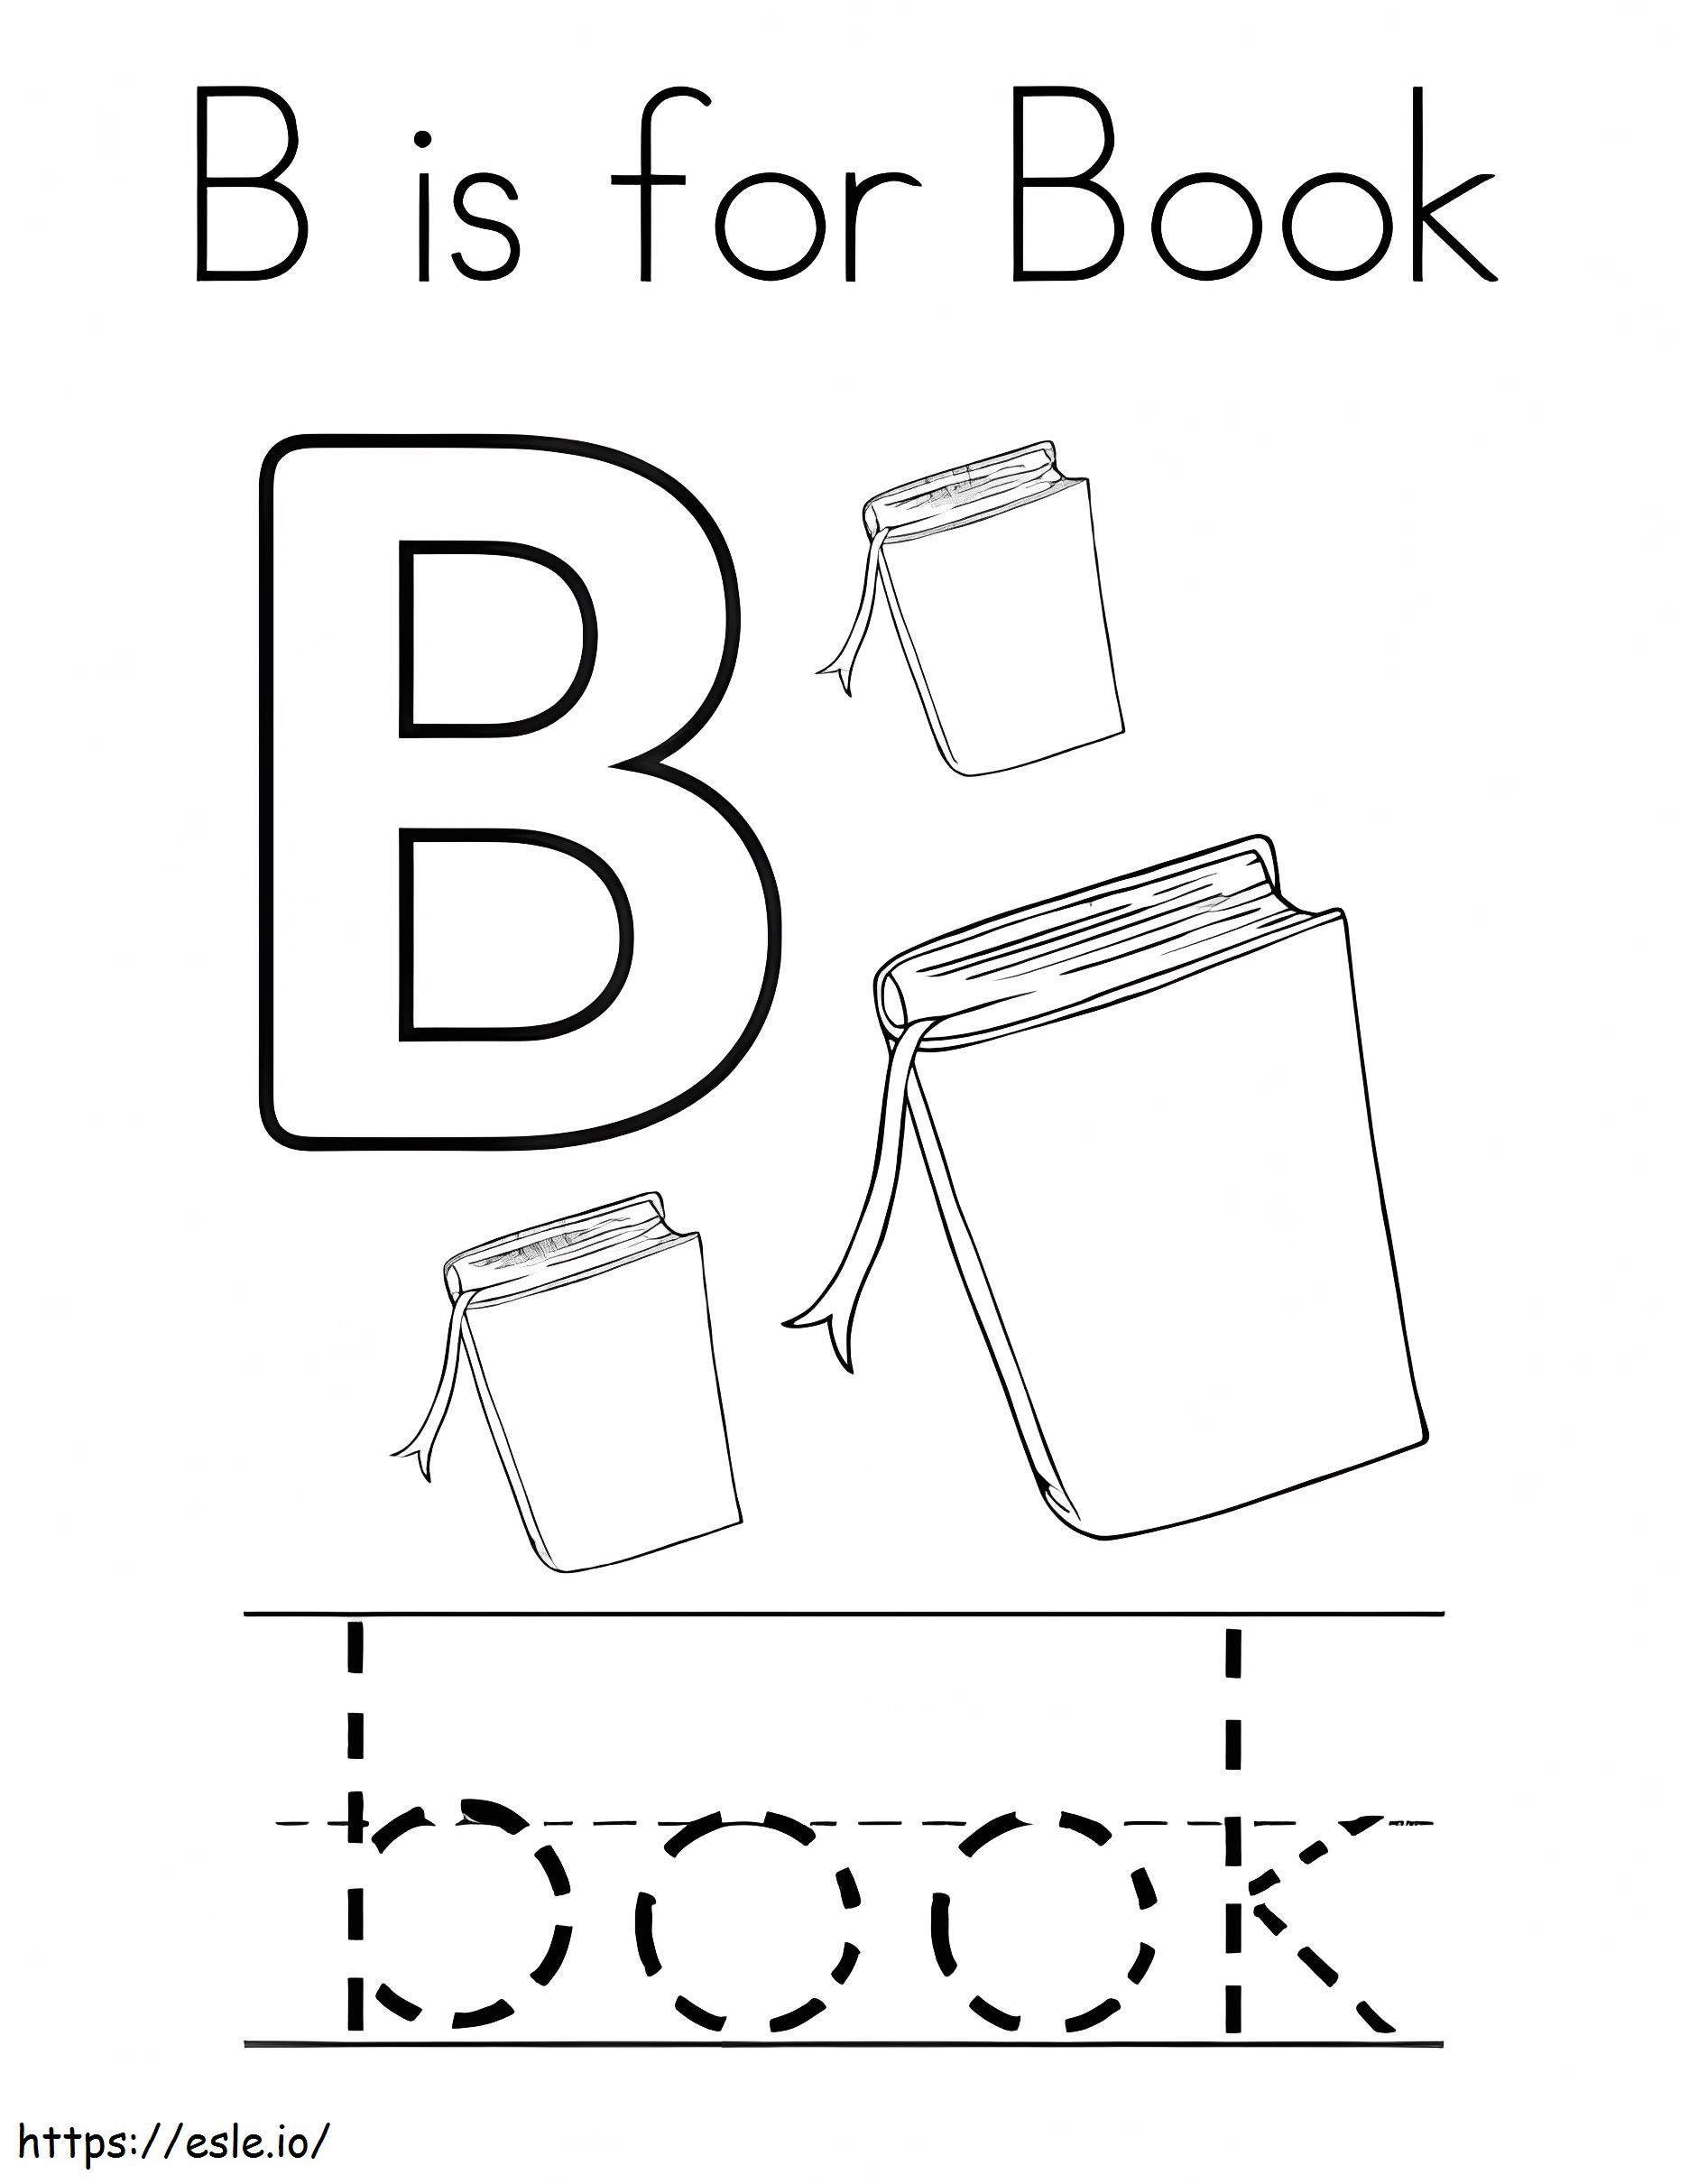 B Is For Book coloring page